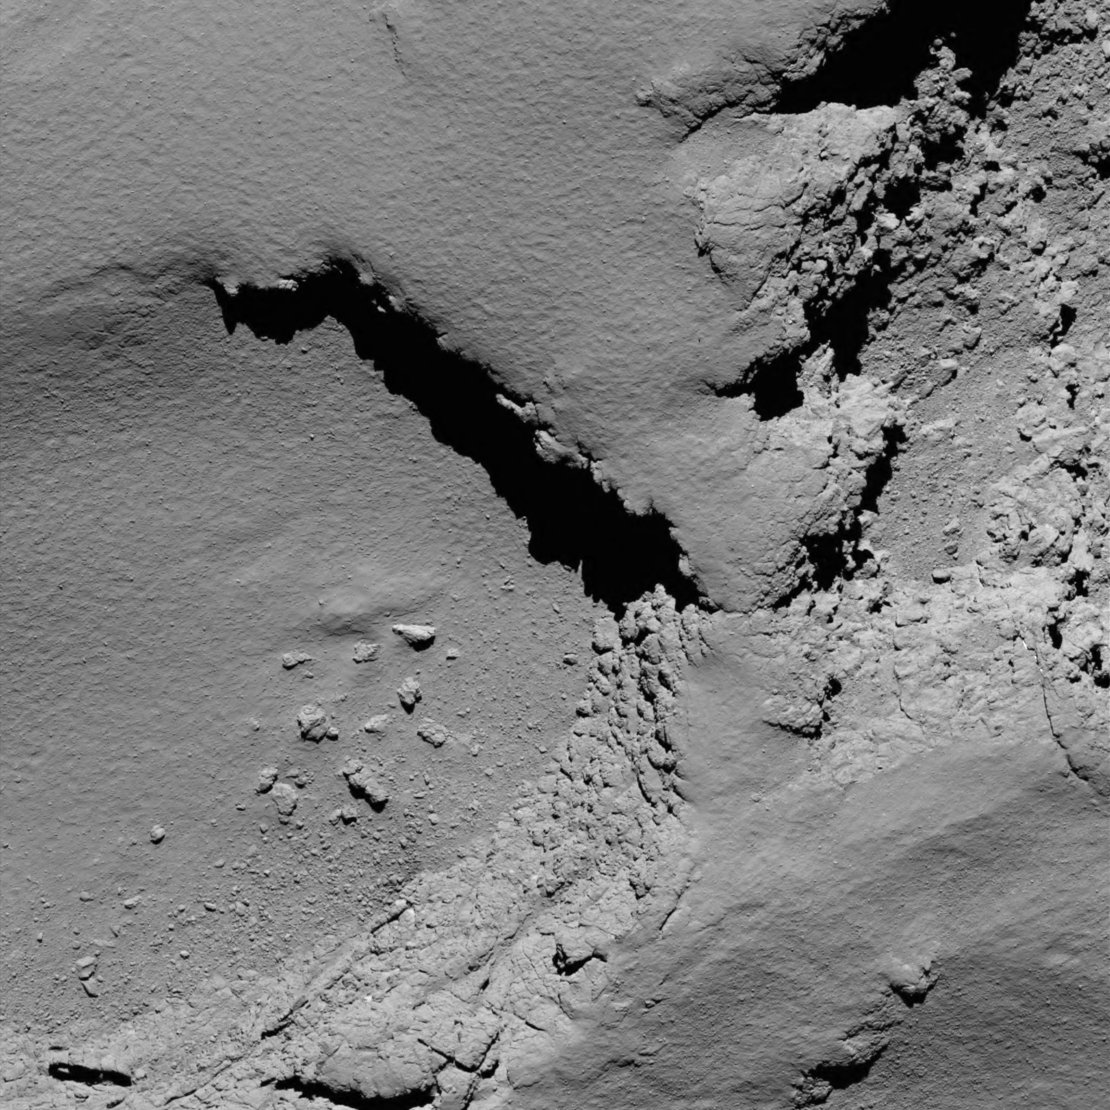 WATCH LIVE NOW: The Rosetta Probe Has Landed on Comet 67P!